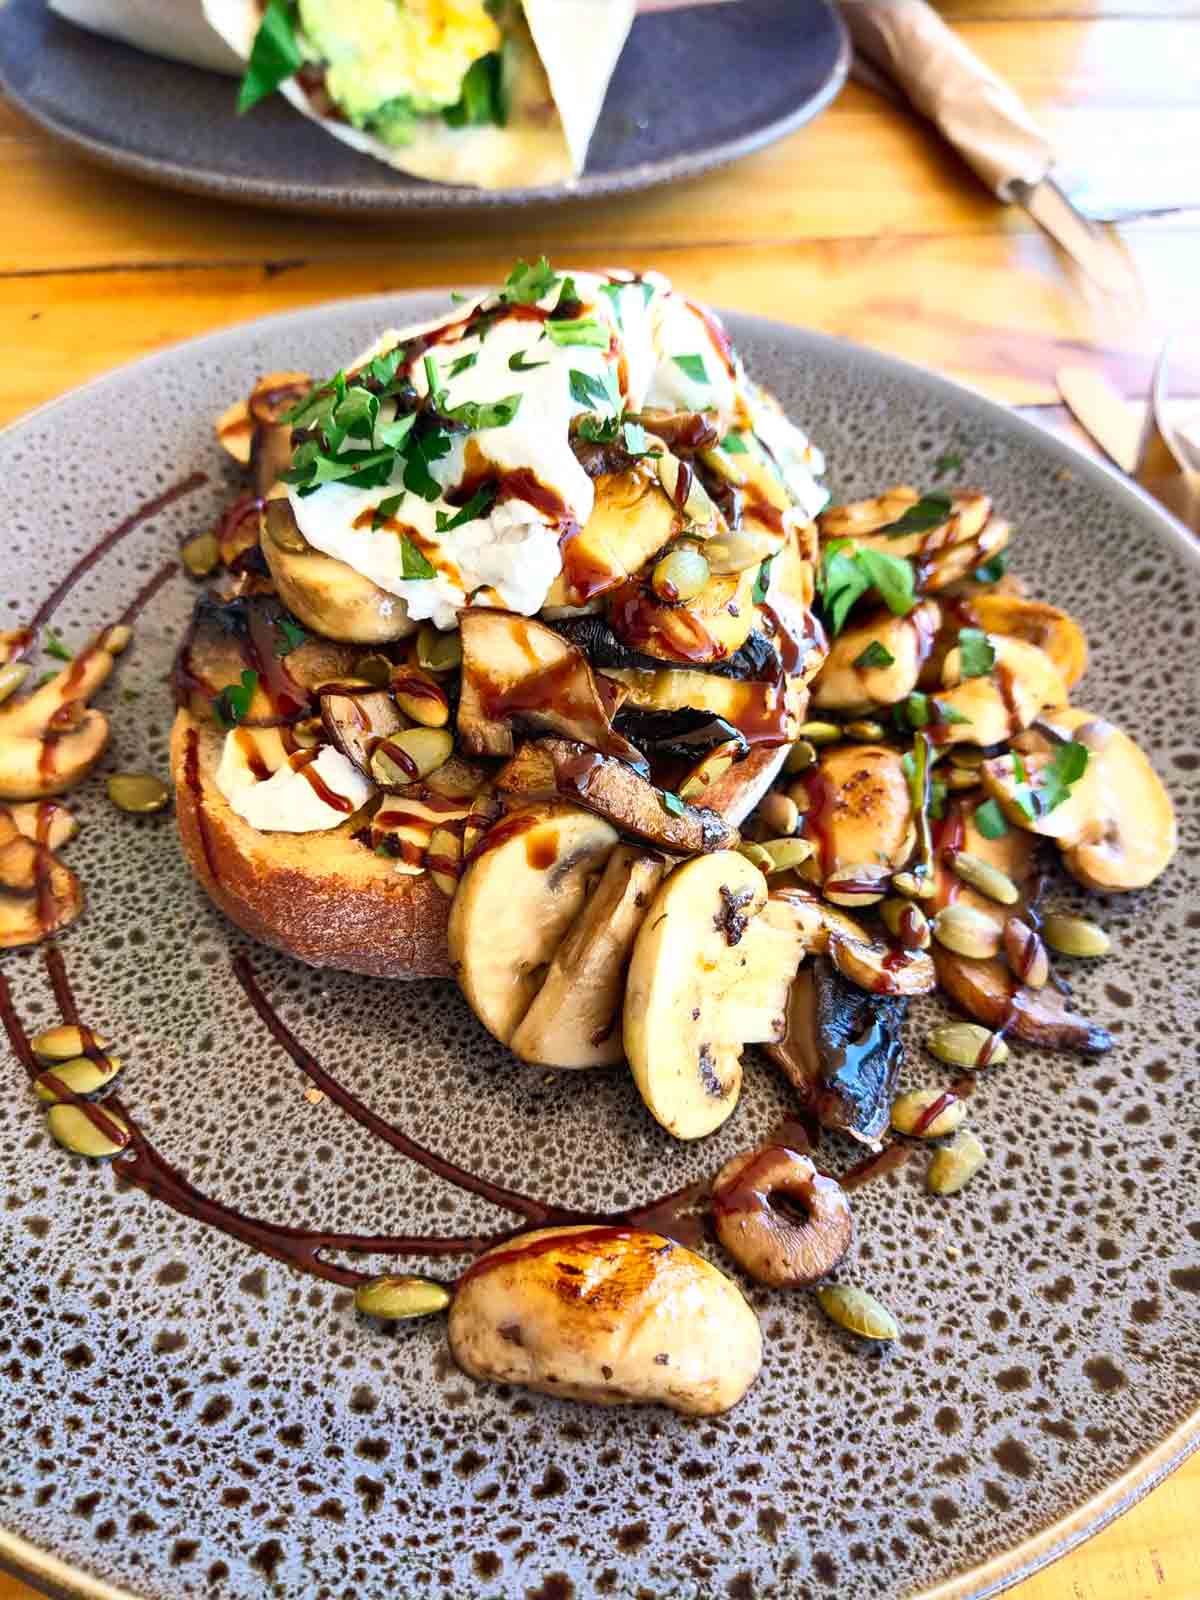 Mushroom Medley brunch at Whisk Away Cafe in Whyalla, Eyre Peninsula, South Australia